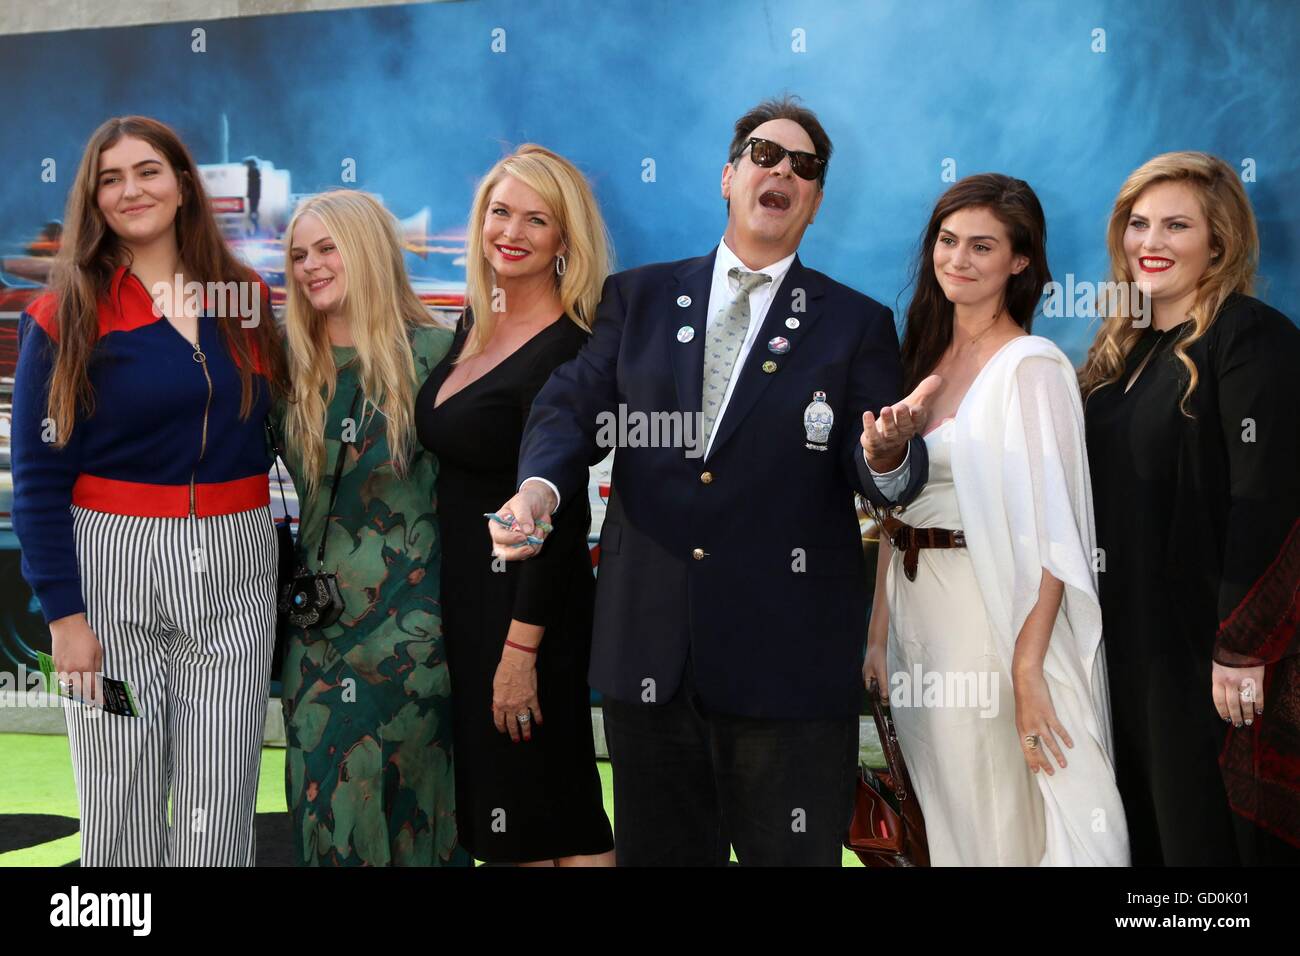 Los Angeles, CA, USA. 9th July, 2016. Donna Dixon, Dan Aykroyd, family at arrivals for GHOSTBUSTERS Premiere, TCL Chinese 6 Theatres (formerly Grauman's), Los Angeles, CA July 9, 2016. © Priscilla Grant/Everett Collection/Alamy Live News Stock Photo